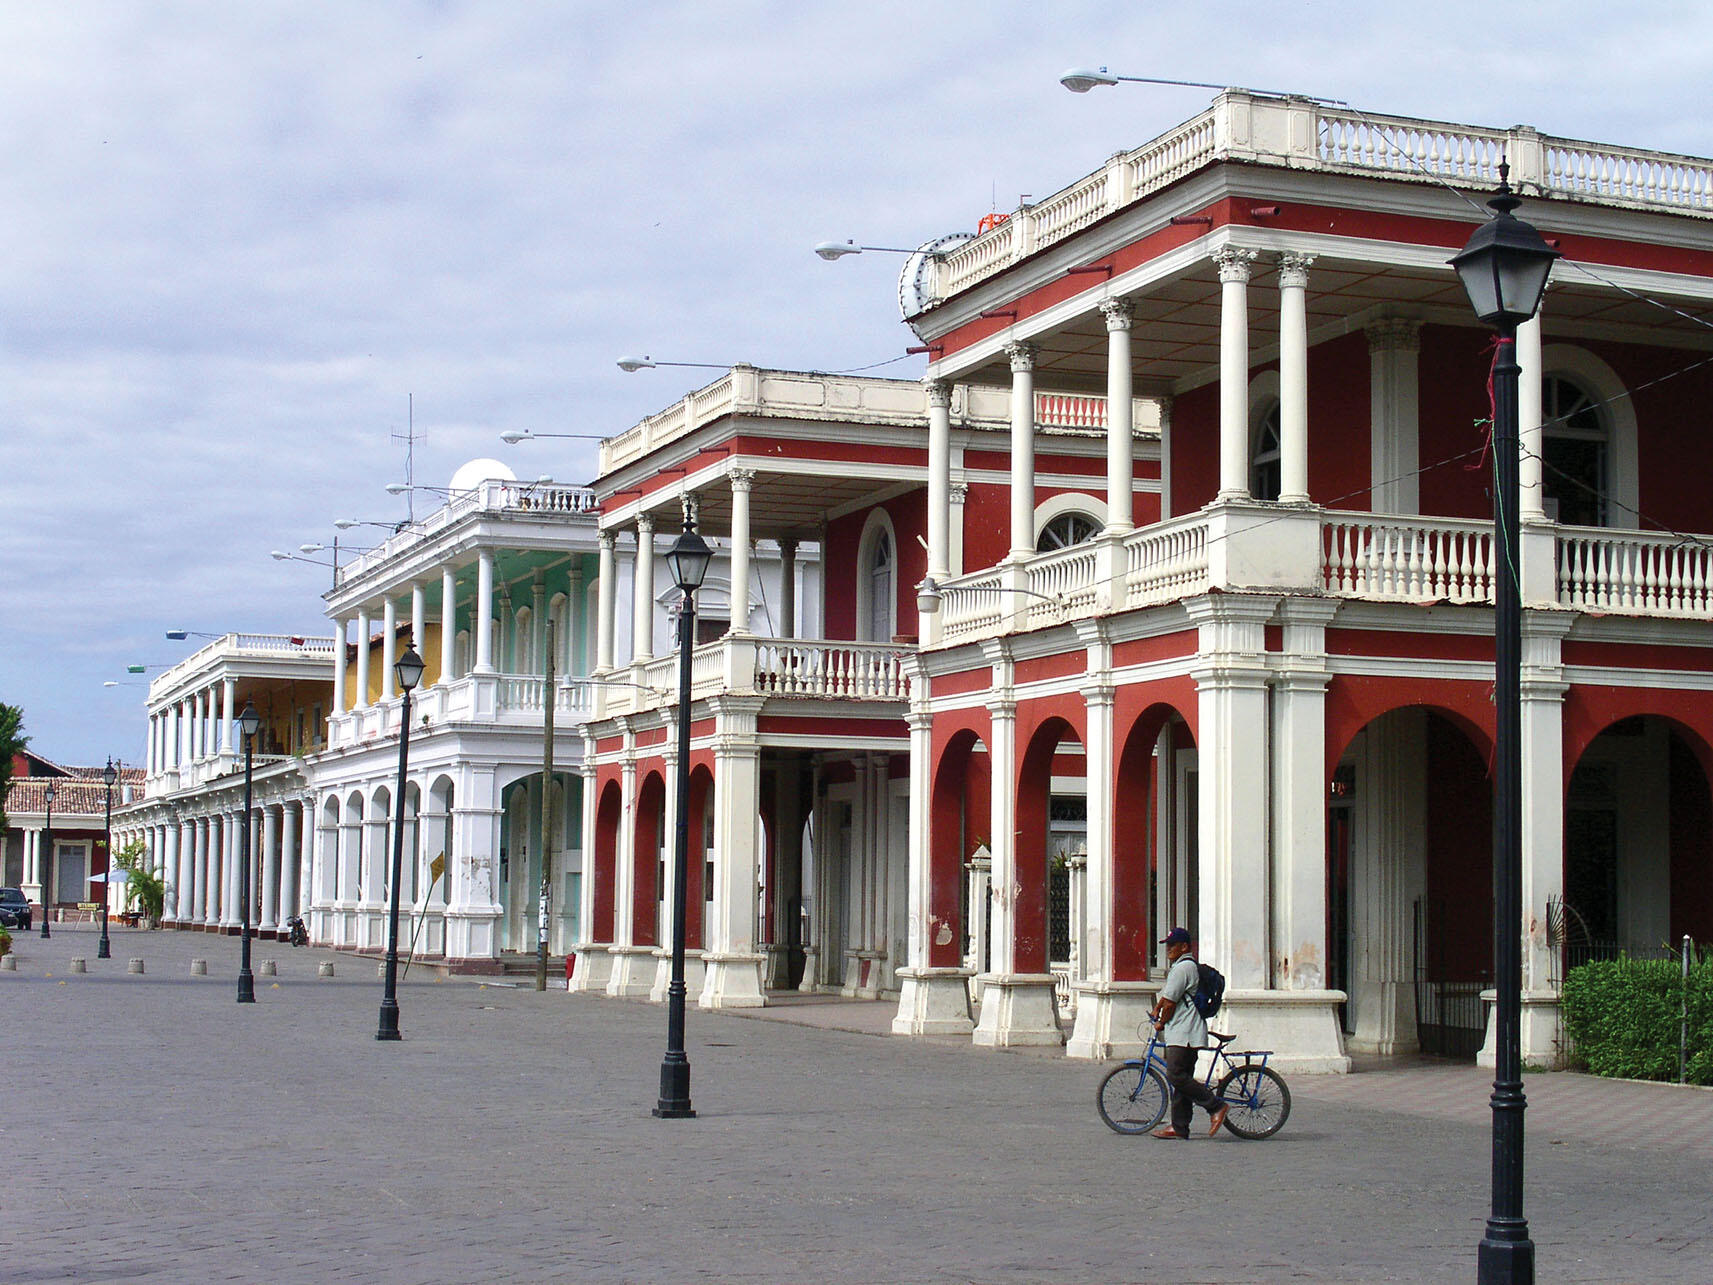 Historic architecture becomes another facet of national pride, as in this town square with colonial-era buildings in Granada, Nicaragua. (Photo by Shawn Millin.)